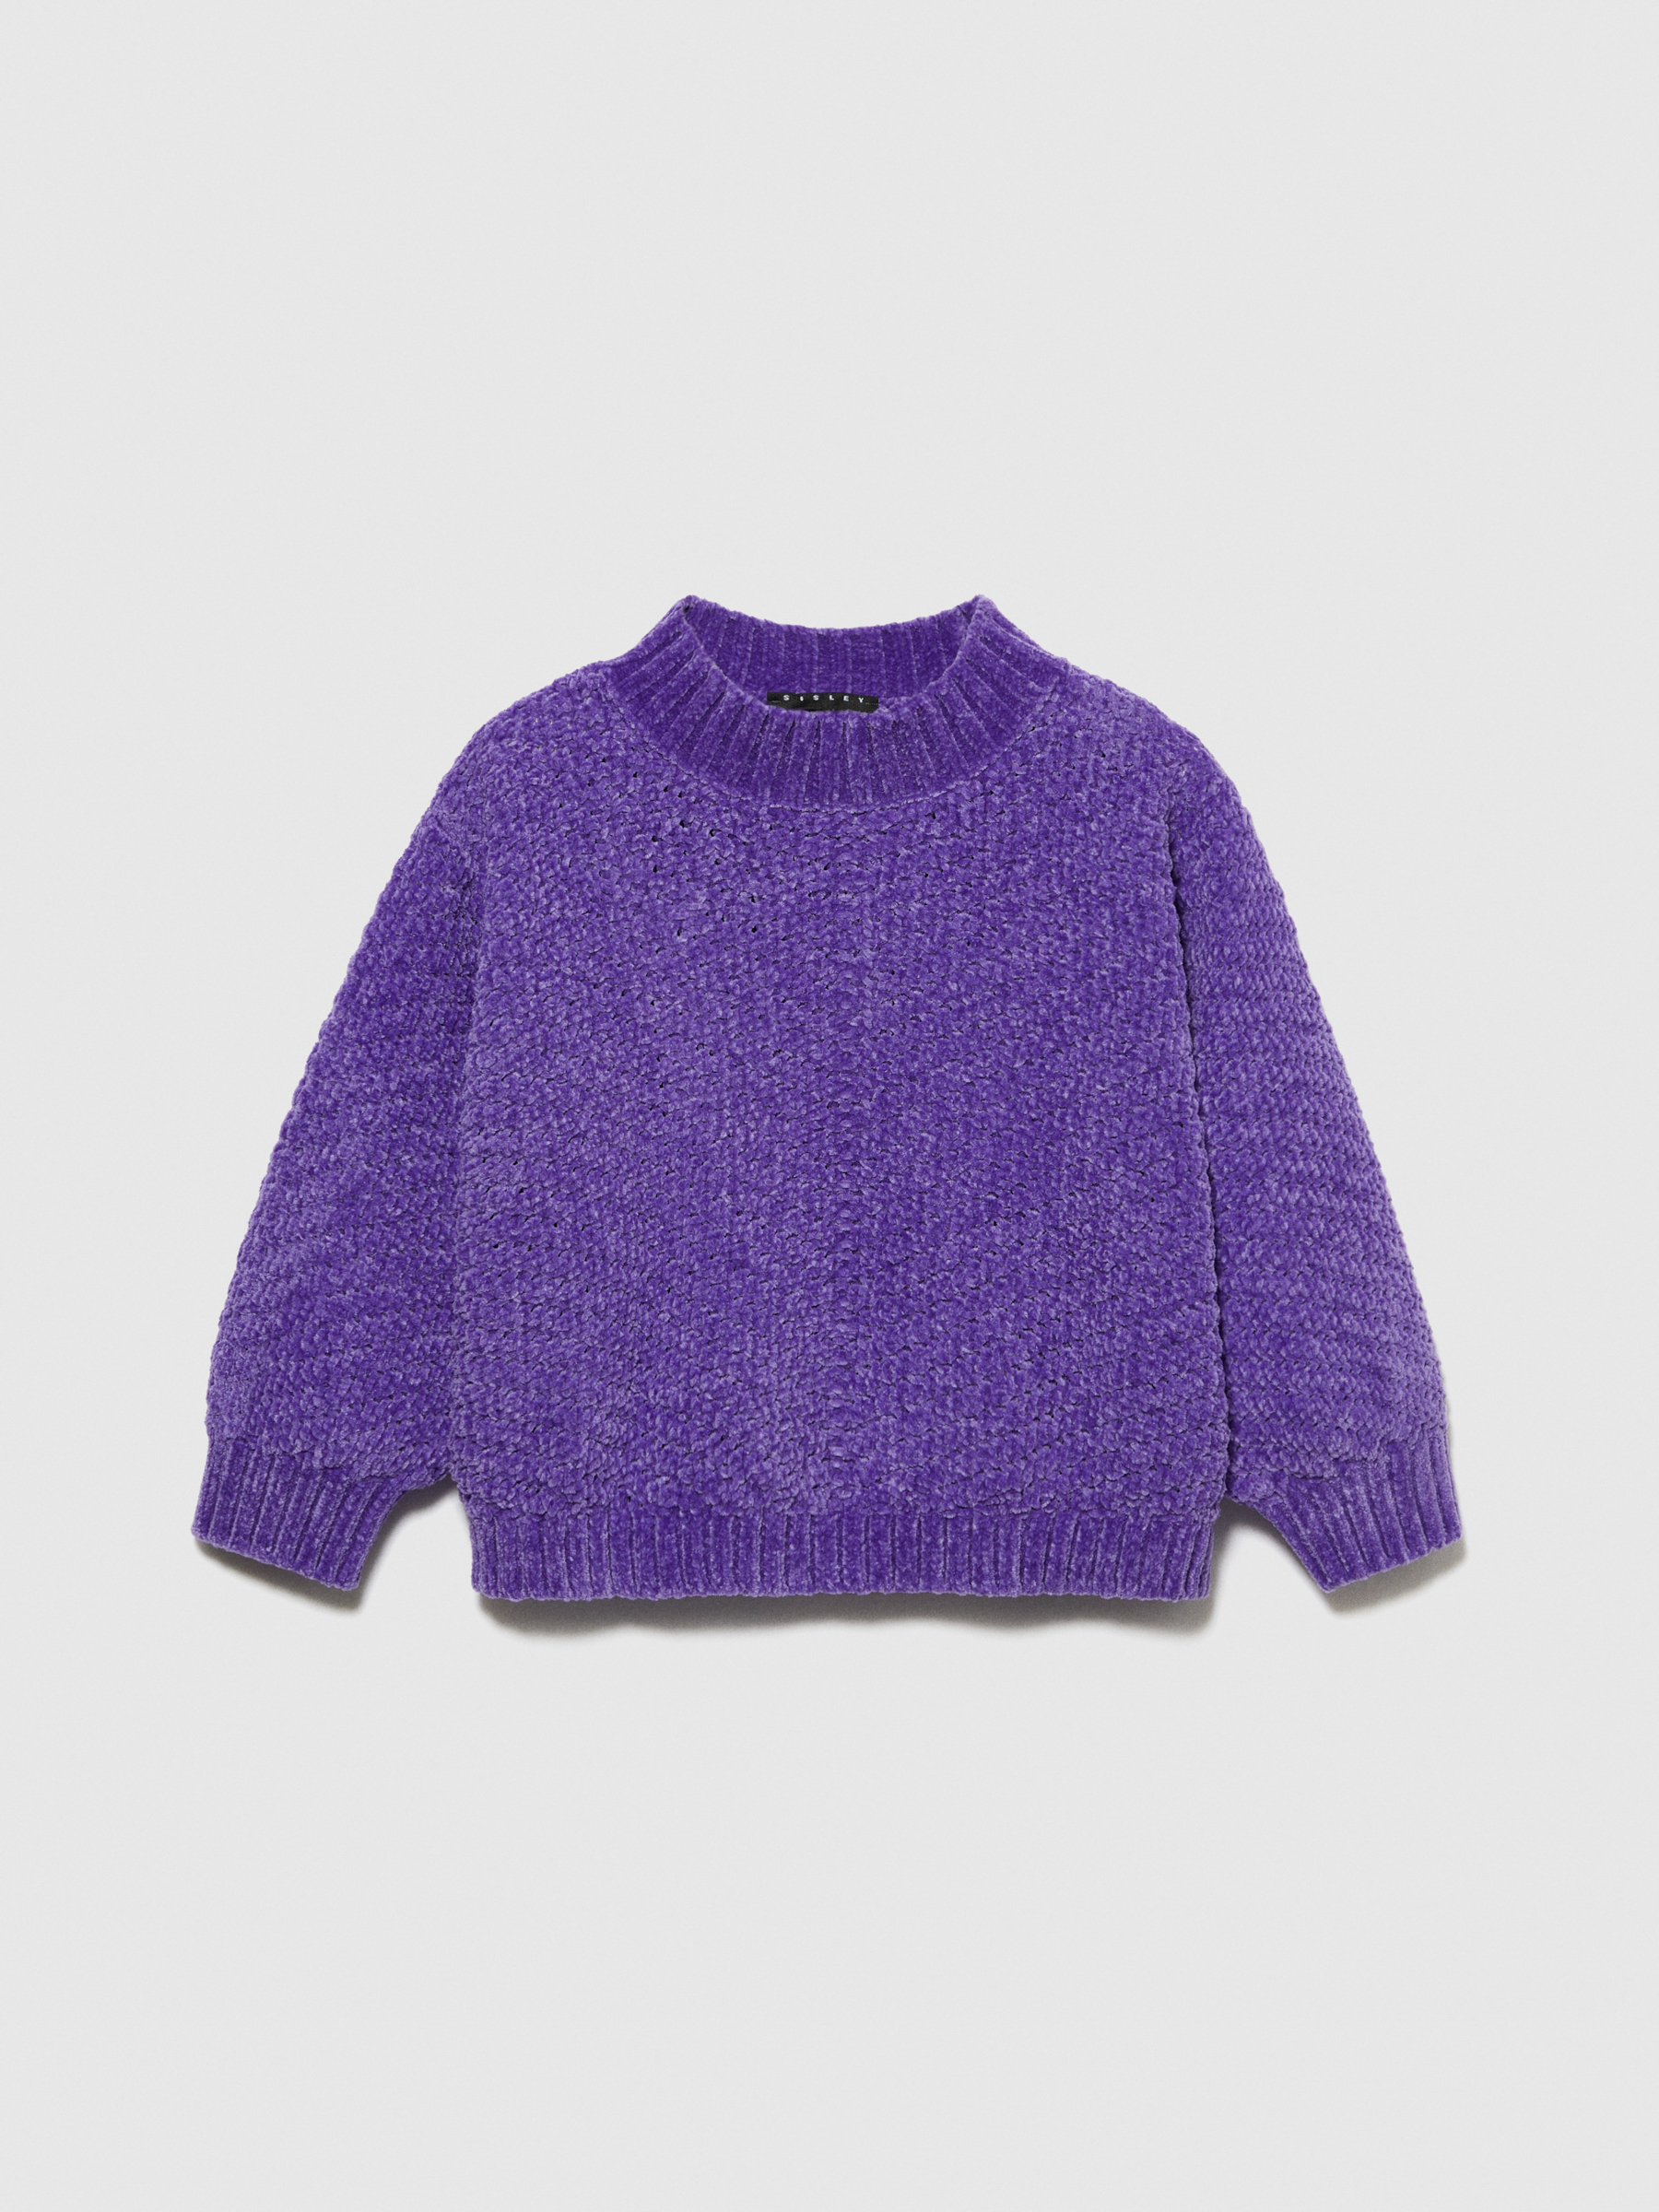 Sisley Young - Cropped Chenille Sweater, Woman, Violet, Size: S